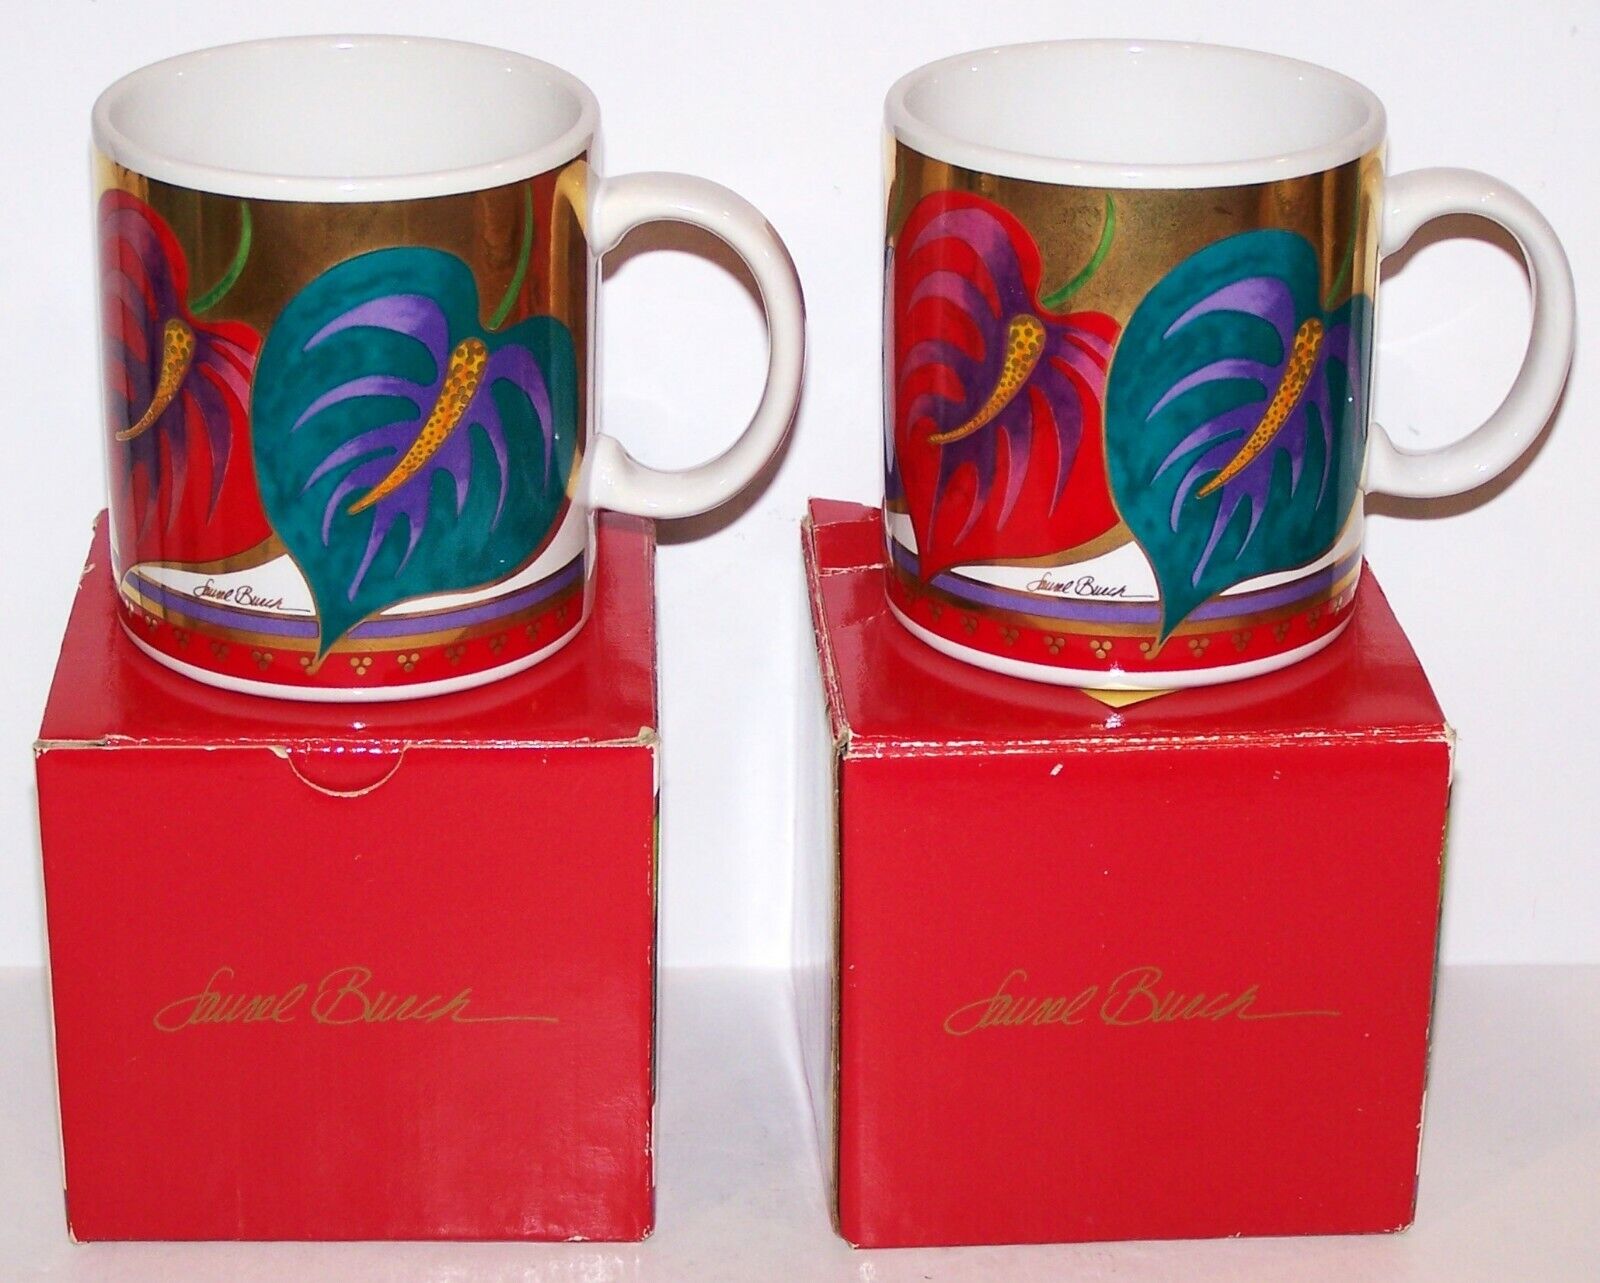 GORGEOUS PAIR OF LAUREL BURCH ANTHURIUM FLORAL COFFEE MUGS IN BOXES